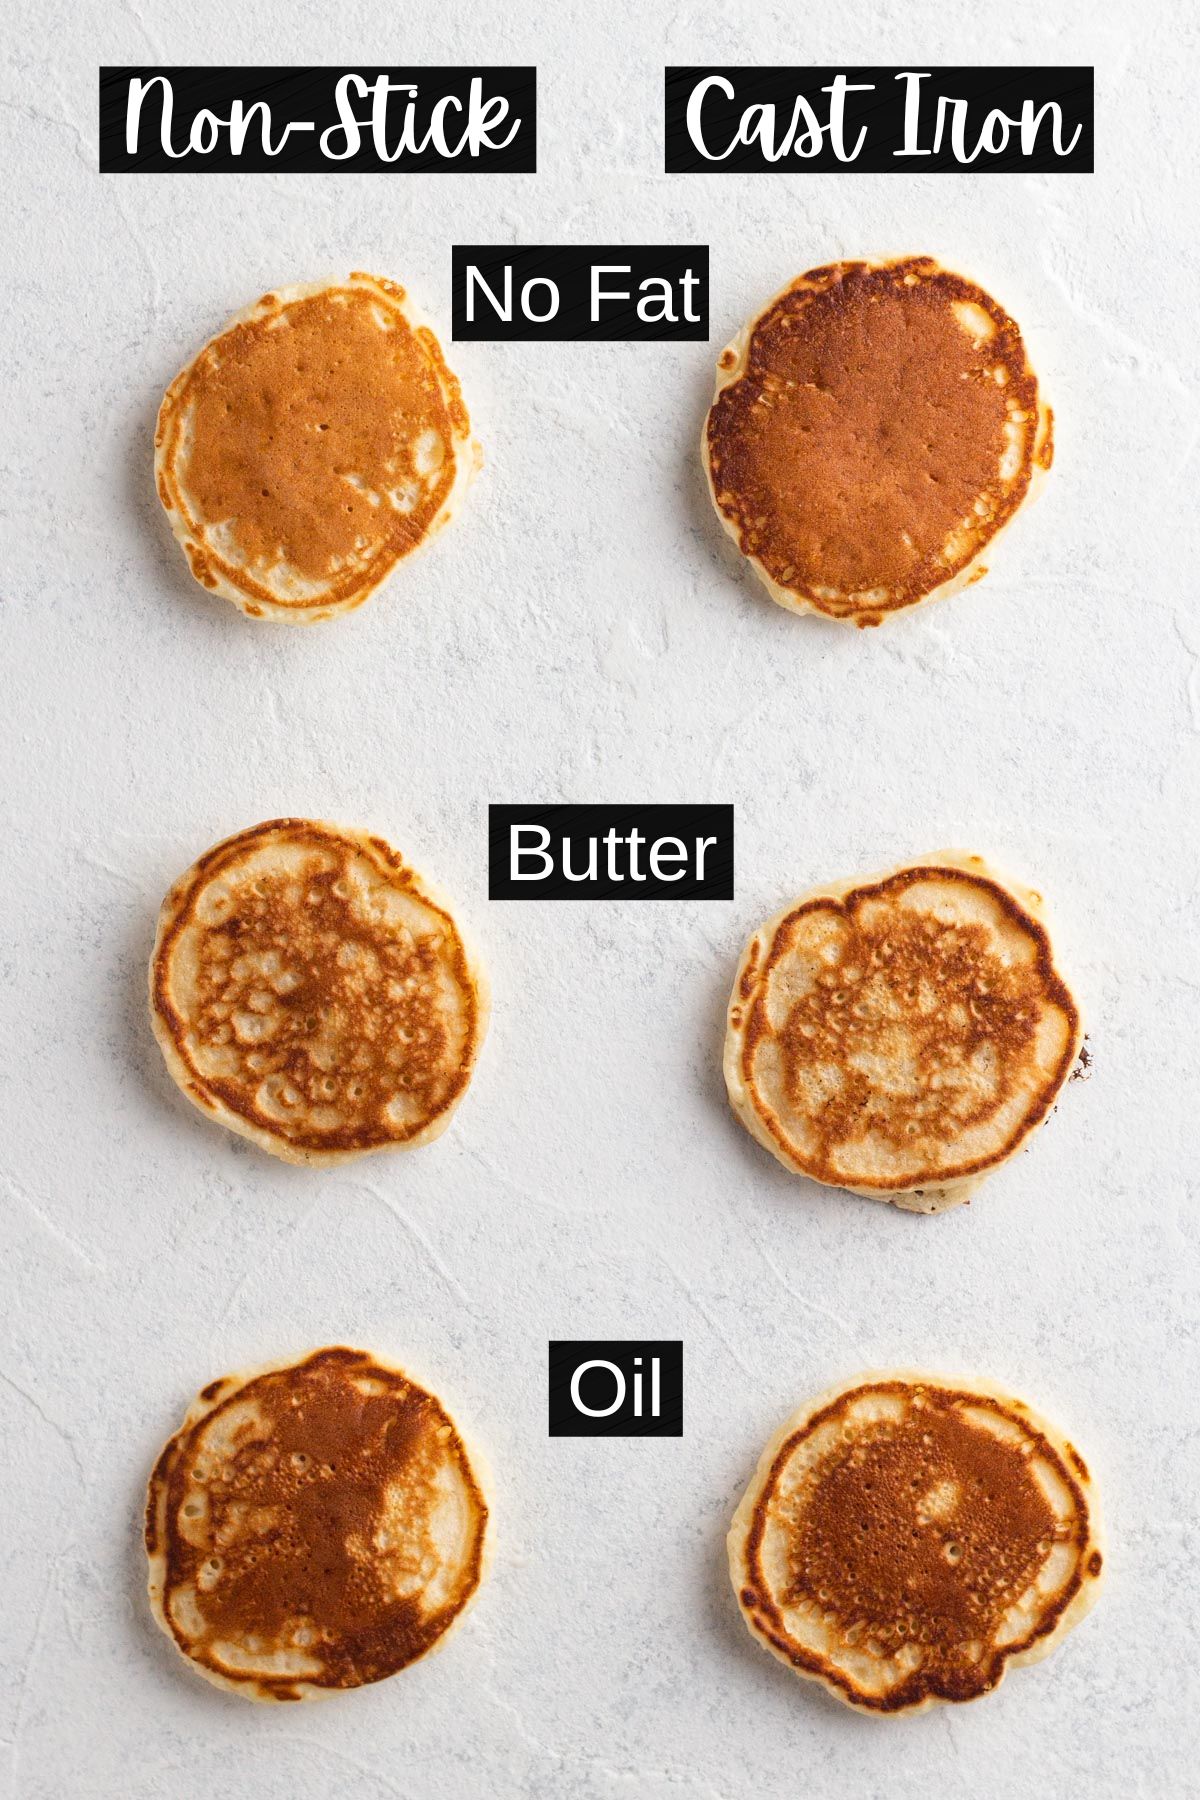 Overhead view of pancakes spread out on a white surface with labels identifying their different cooking methods.